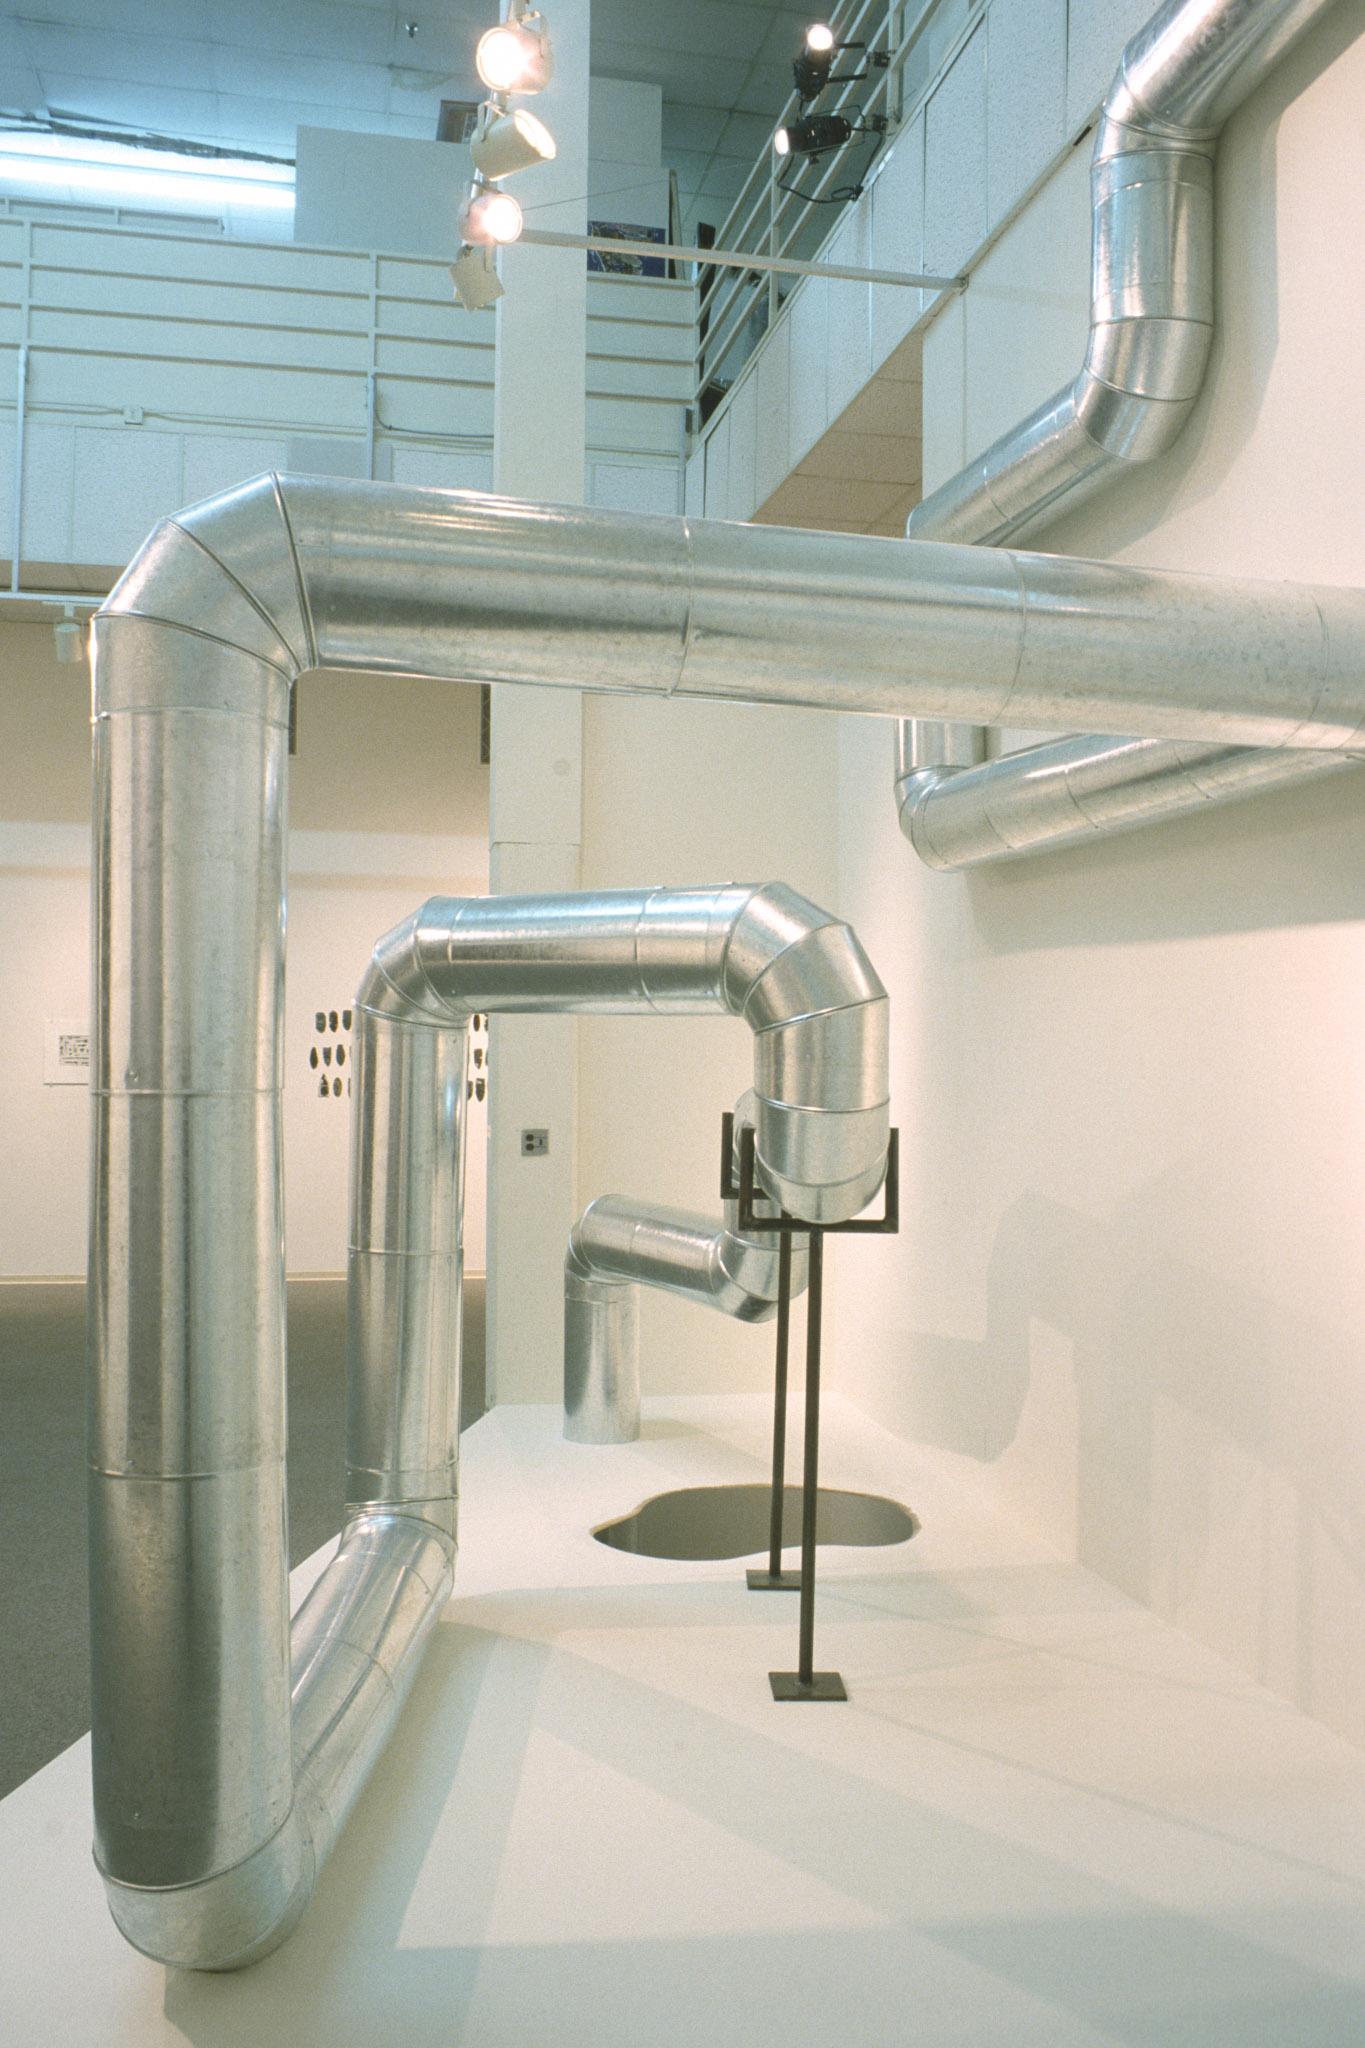 large steel duct zig zags through the air and along a wall in a gallery space.